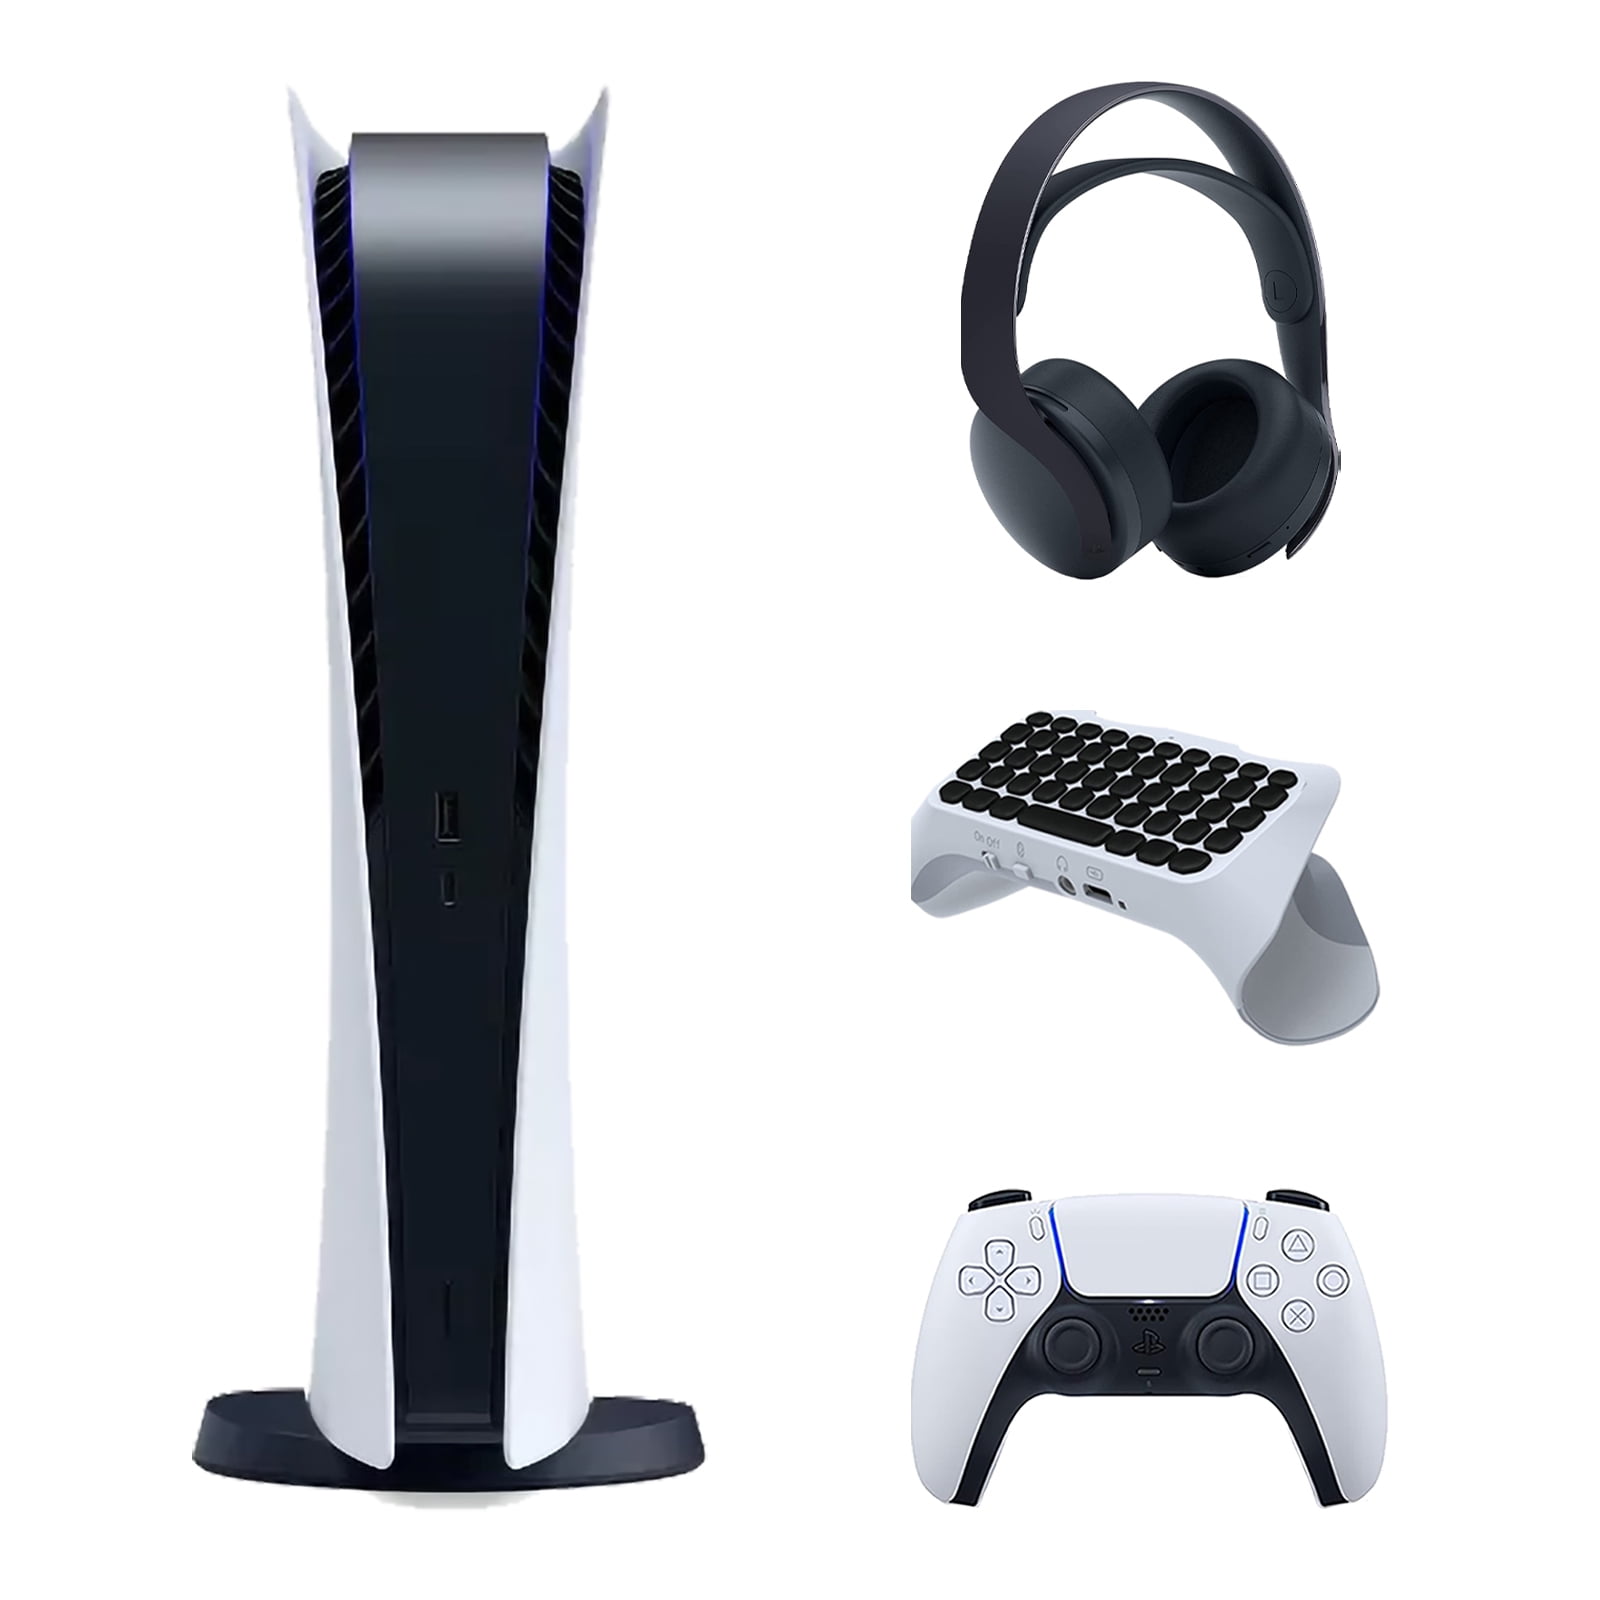 Sony Playstation 5 Digital Edition Console with Black PULSE 3D Wireless  Gaming Headset and Surge QuickType 2.0 Wireless PS5 Controller Keypad